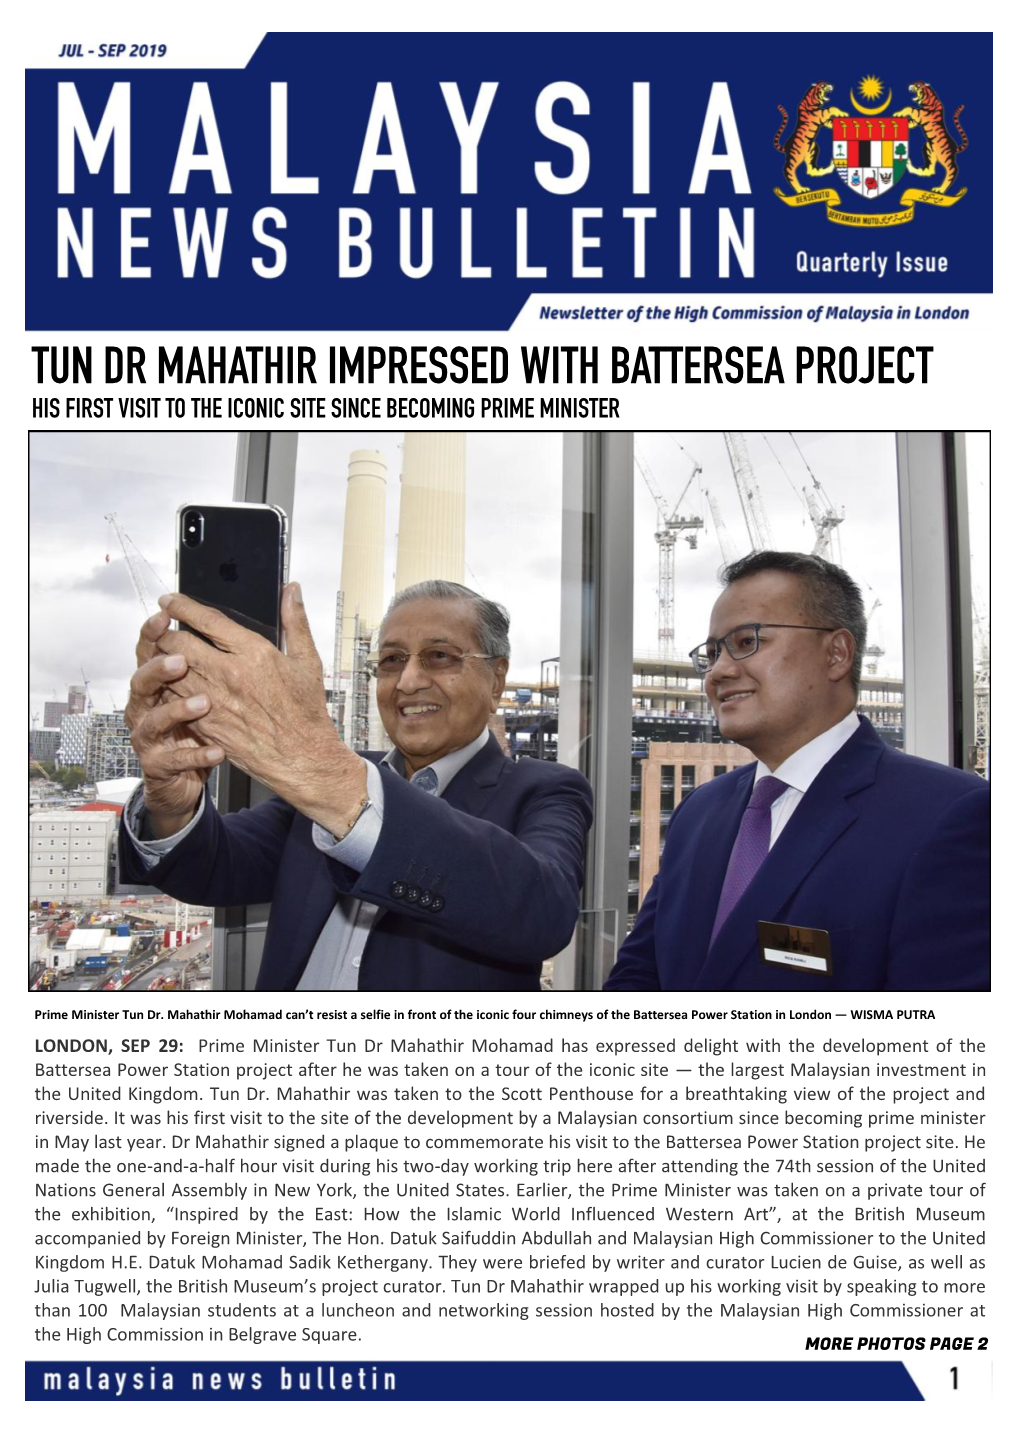 Tun Dr Mahathir Impressed with Battersea Project His First Visit to the Iconic Site Since Becoming Prime Minister